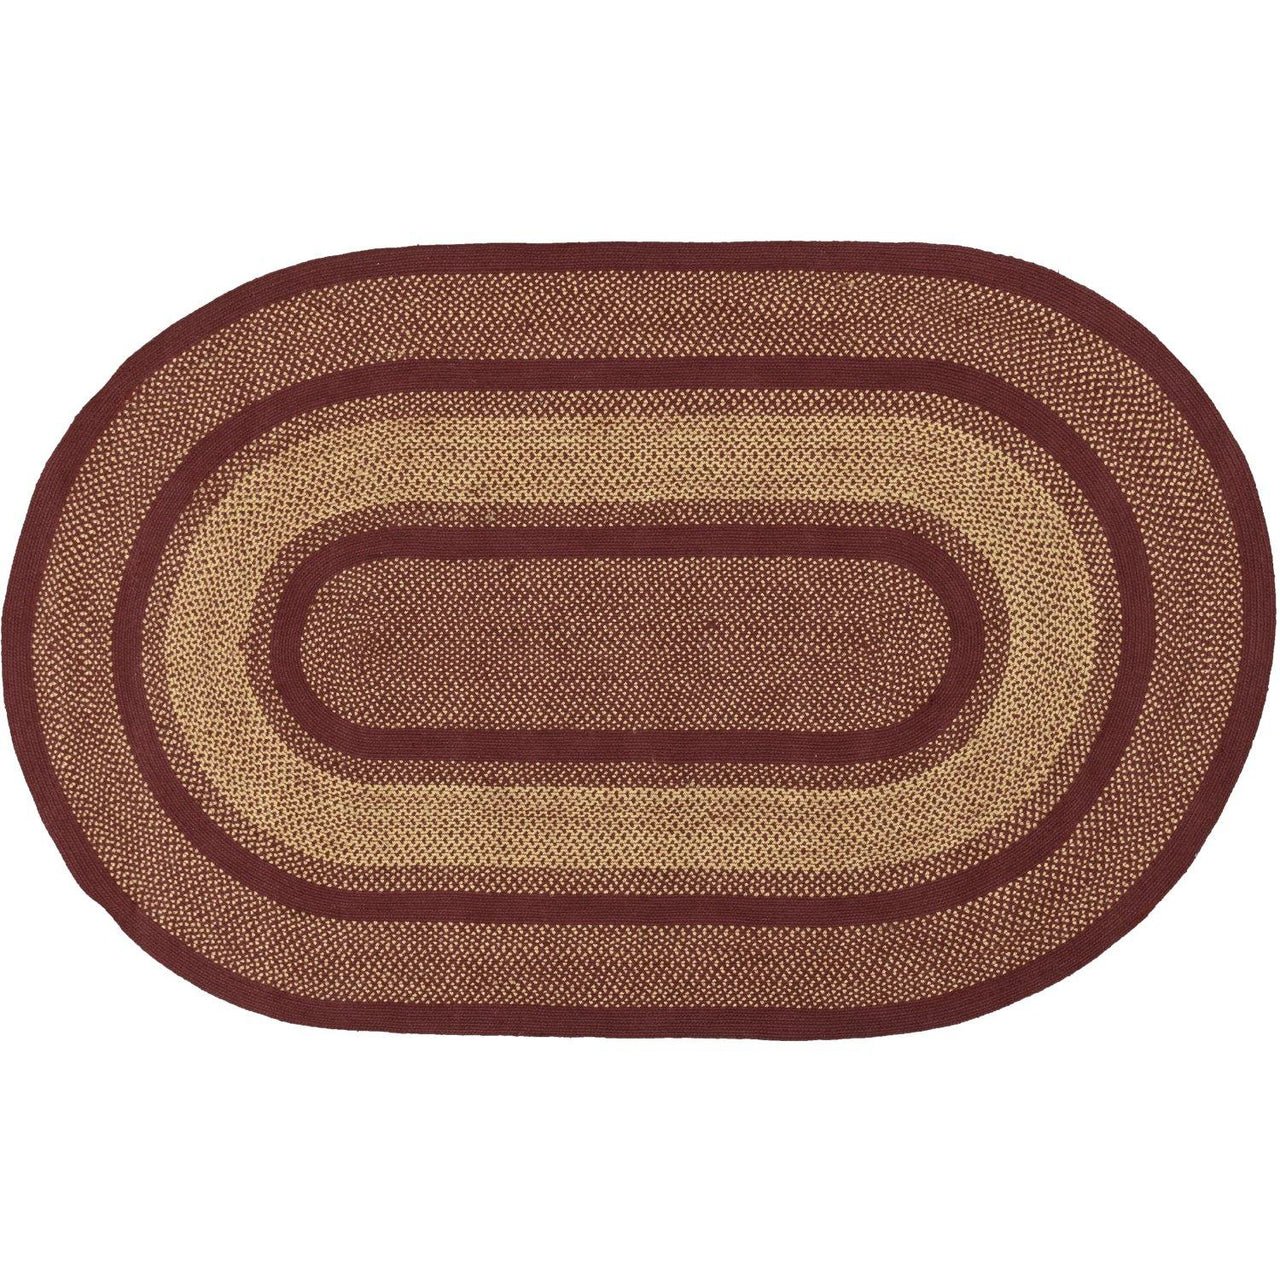 Burgundy Red Primitive Jute Braided Rug Oval 5'x8' with Rug Pad VHC Brands - The Fox Decor